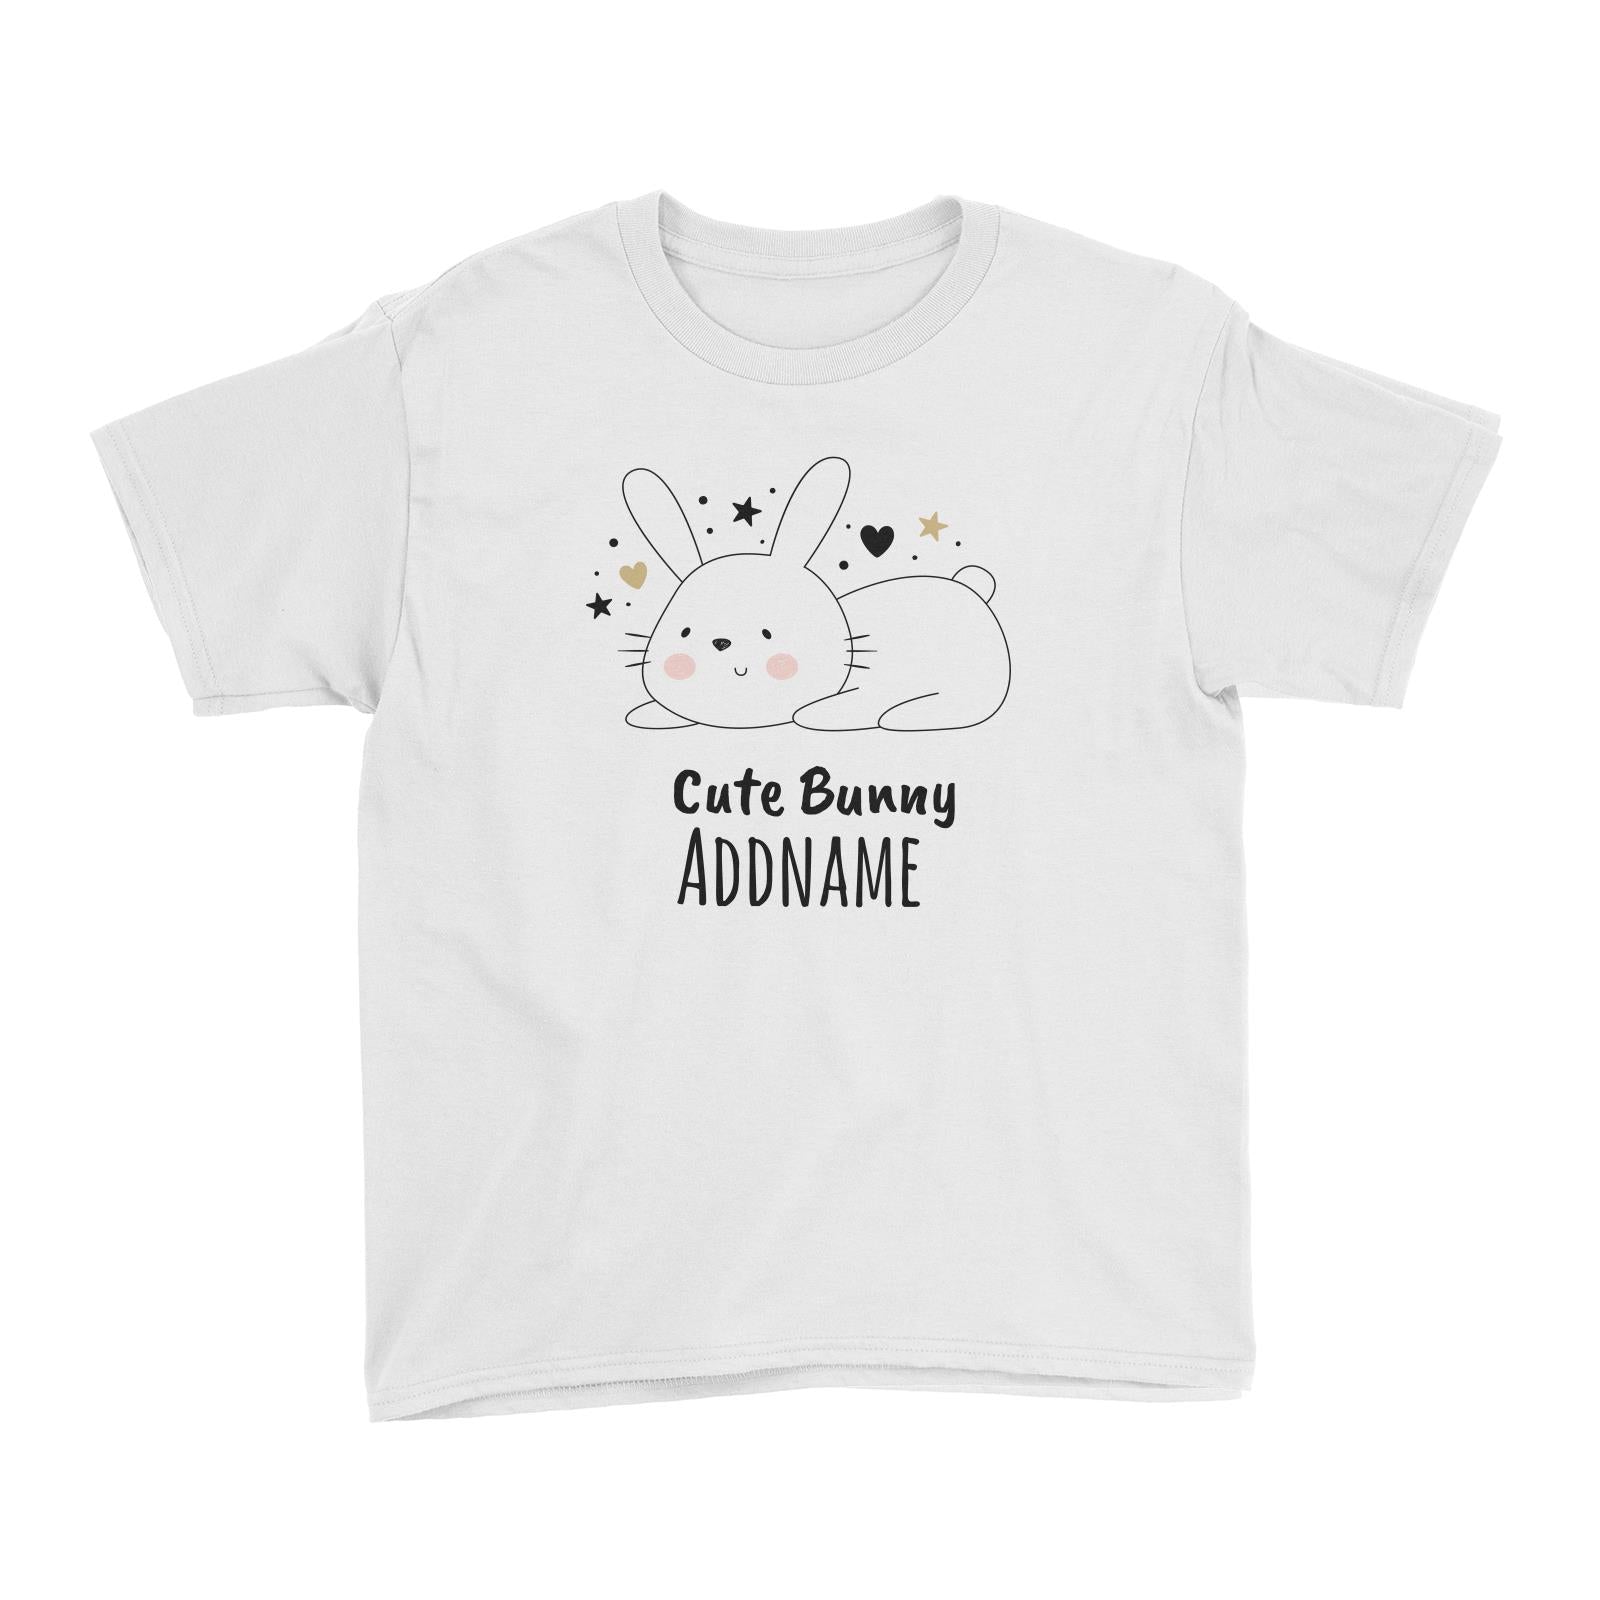 Drawn Adorable Animals Cute Bunny Addname Kid's T-Shirt